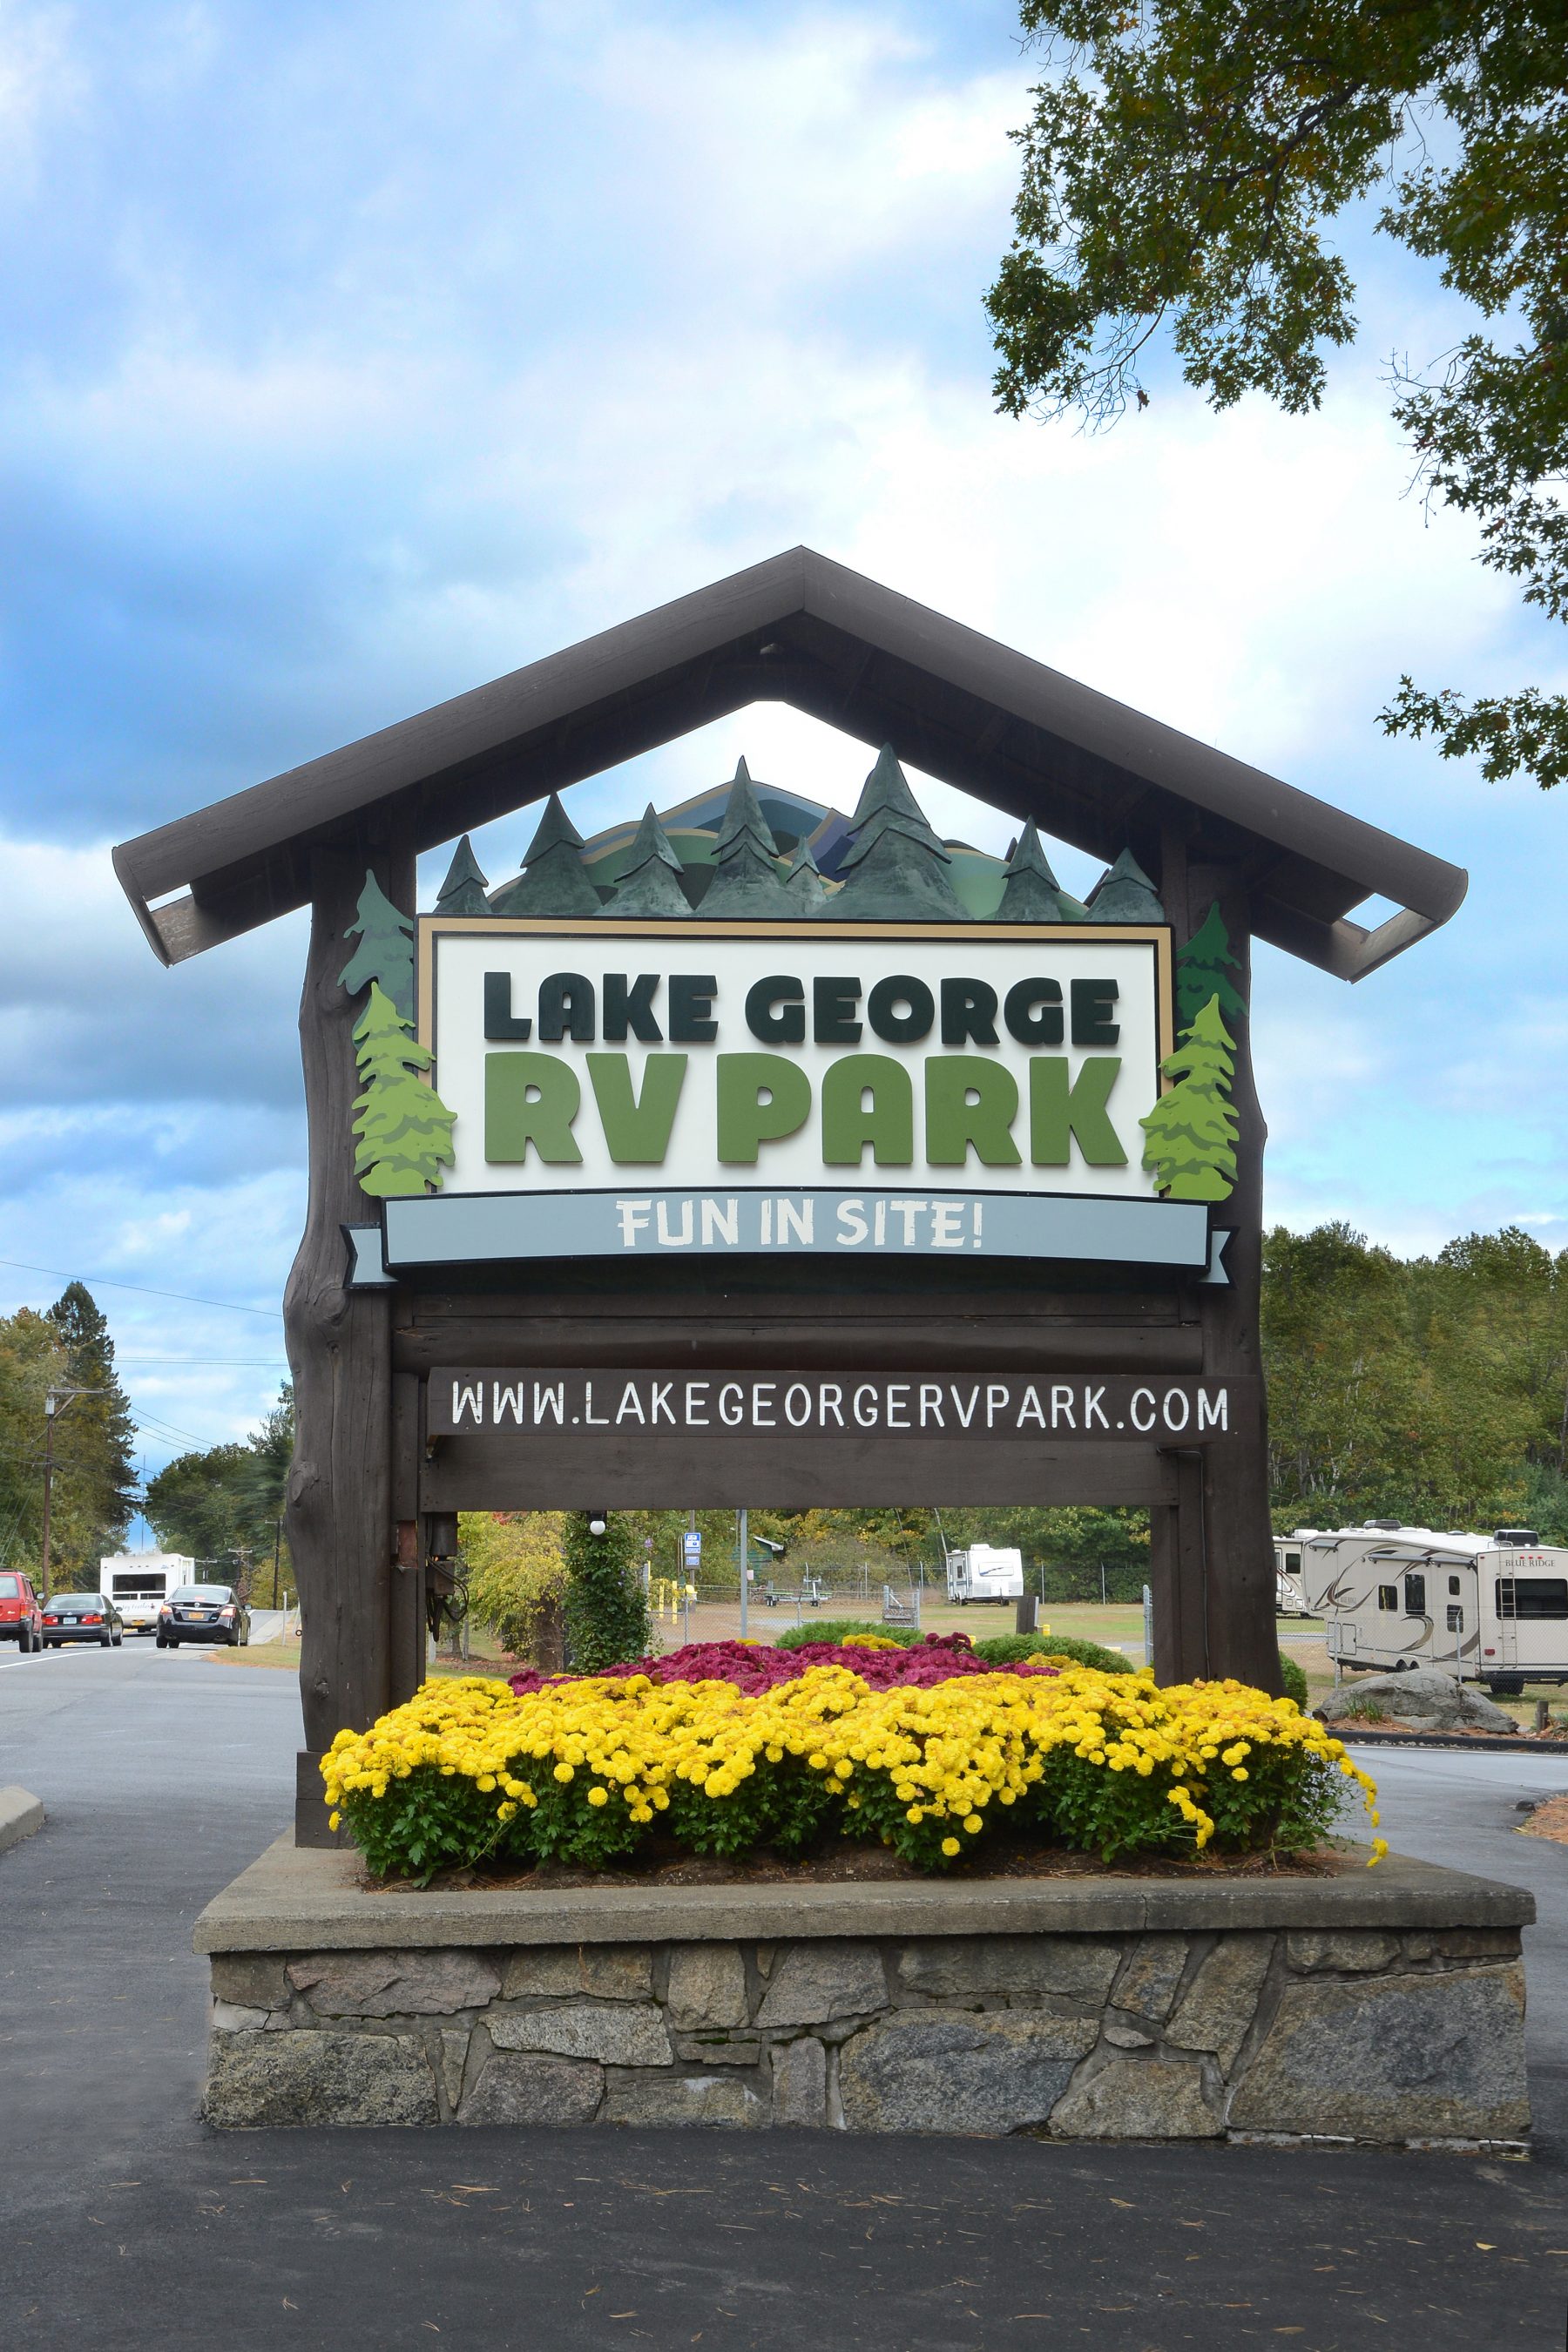 We have one entrance to the park – located on Route 149